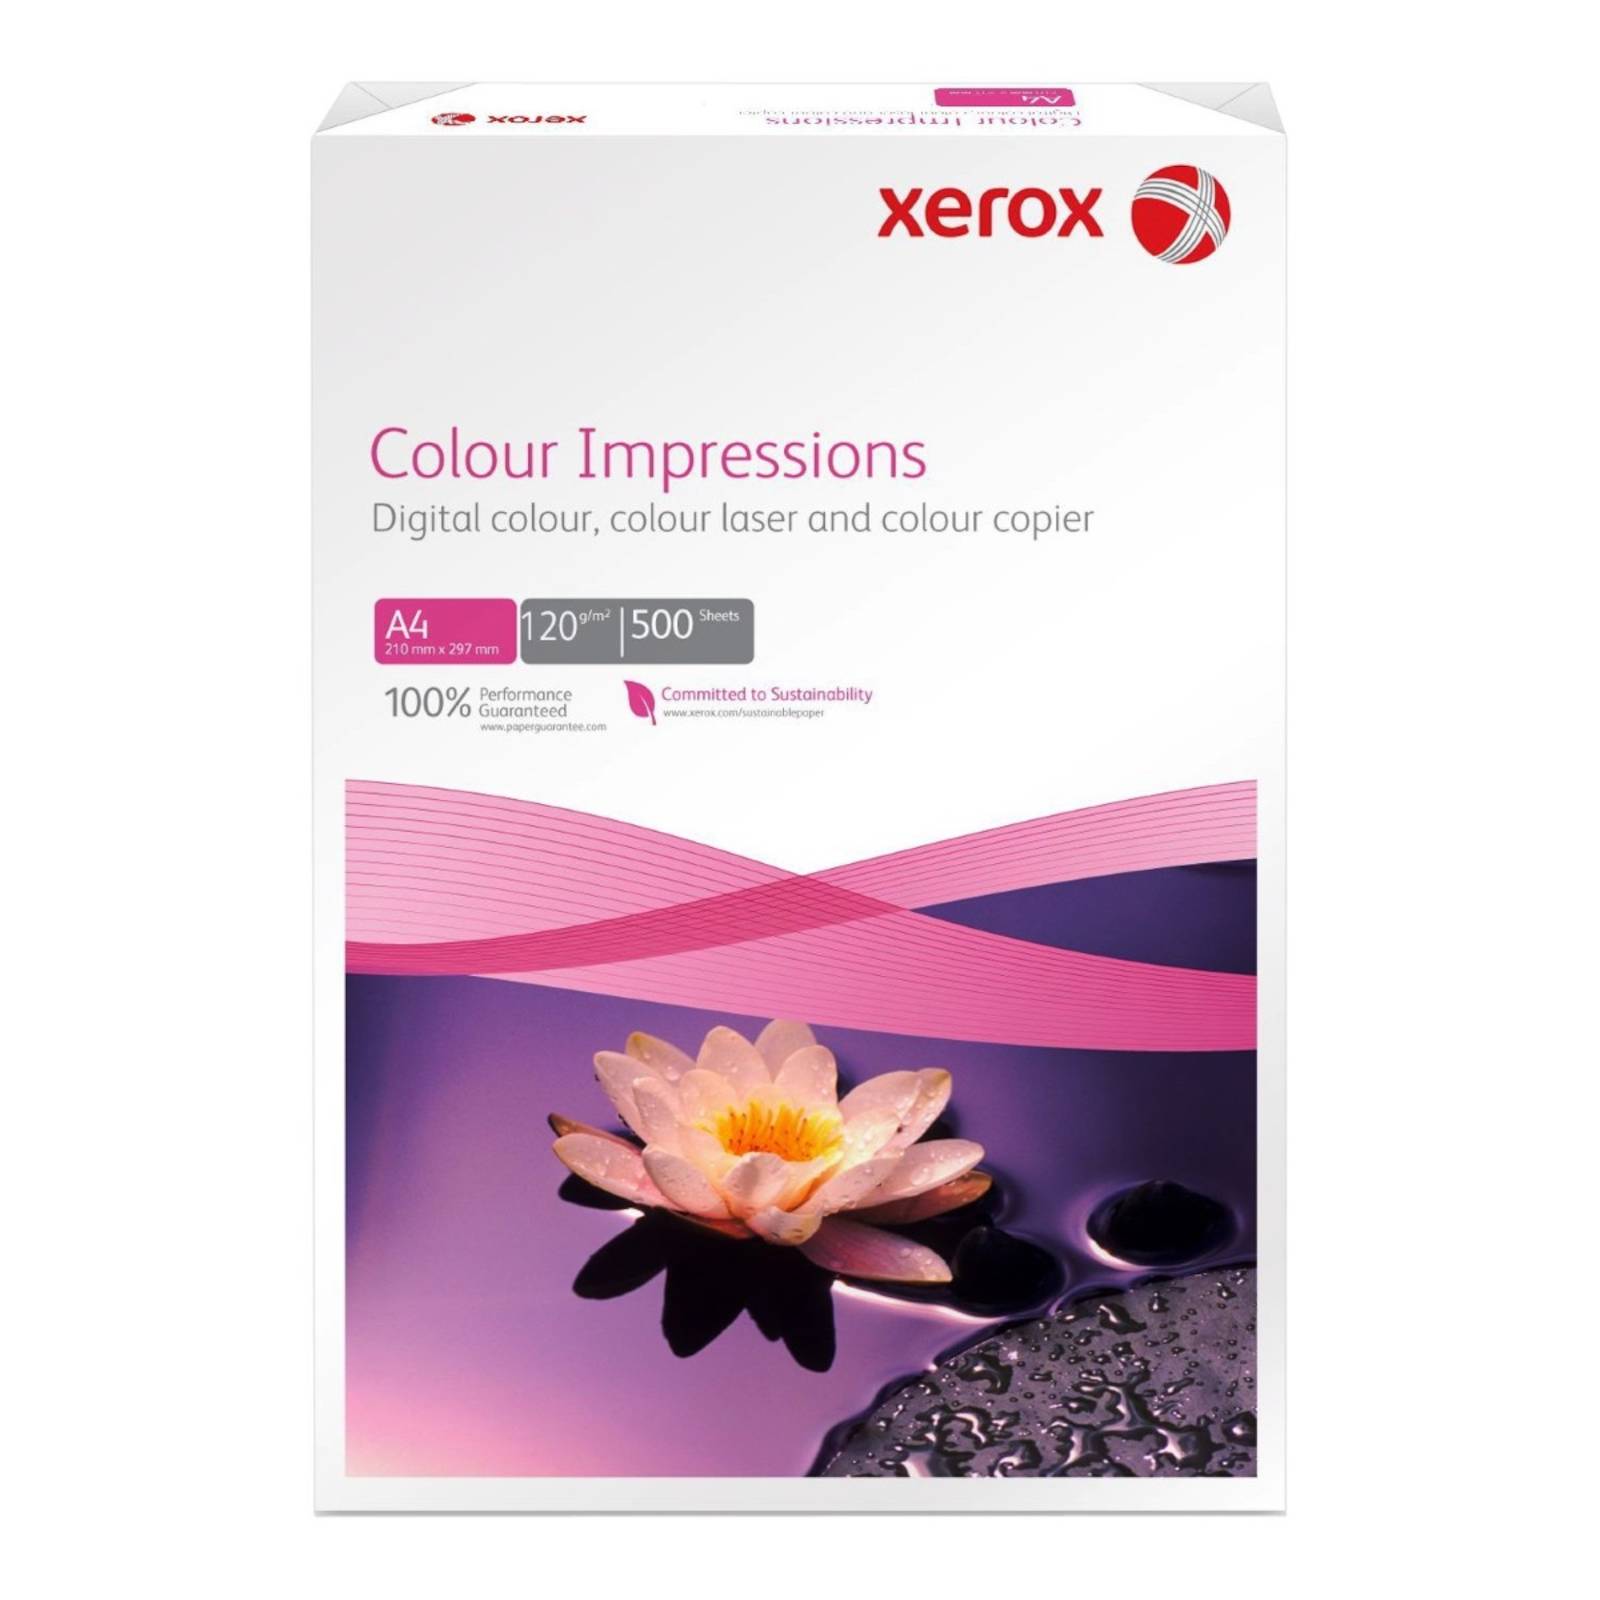 Xerox Colour Impressions A4 120gsm Printer Paper 500 Sheets (1 Ream)